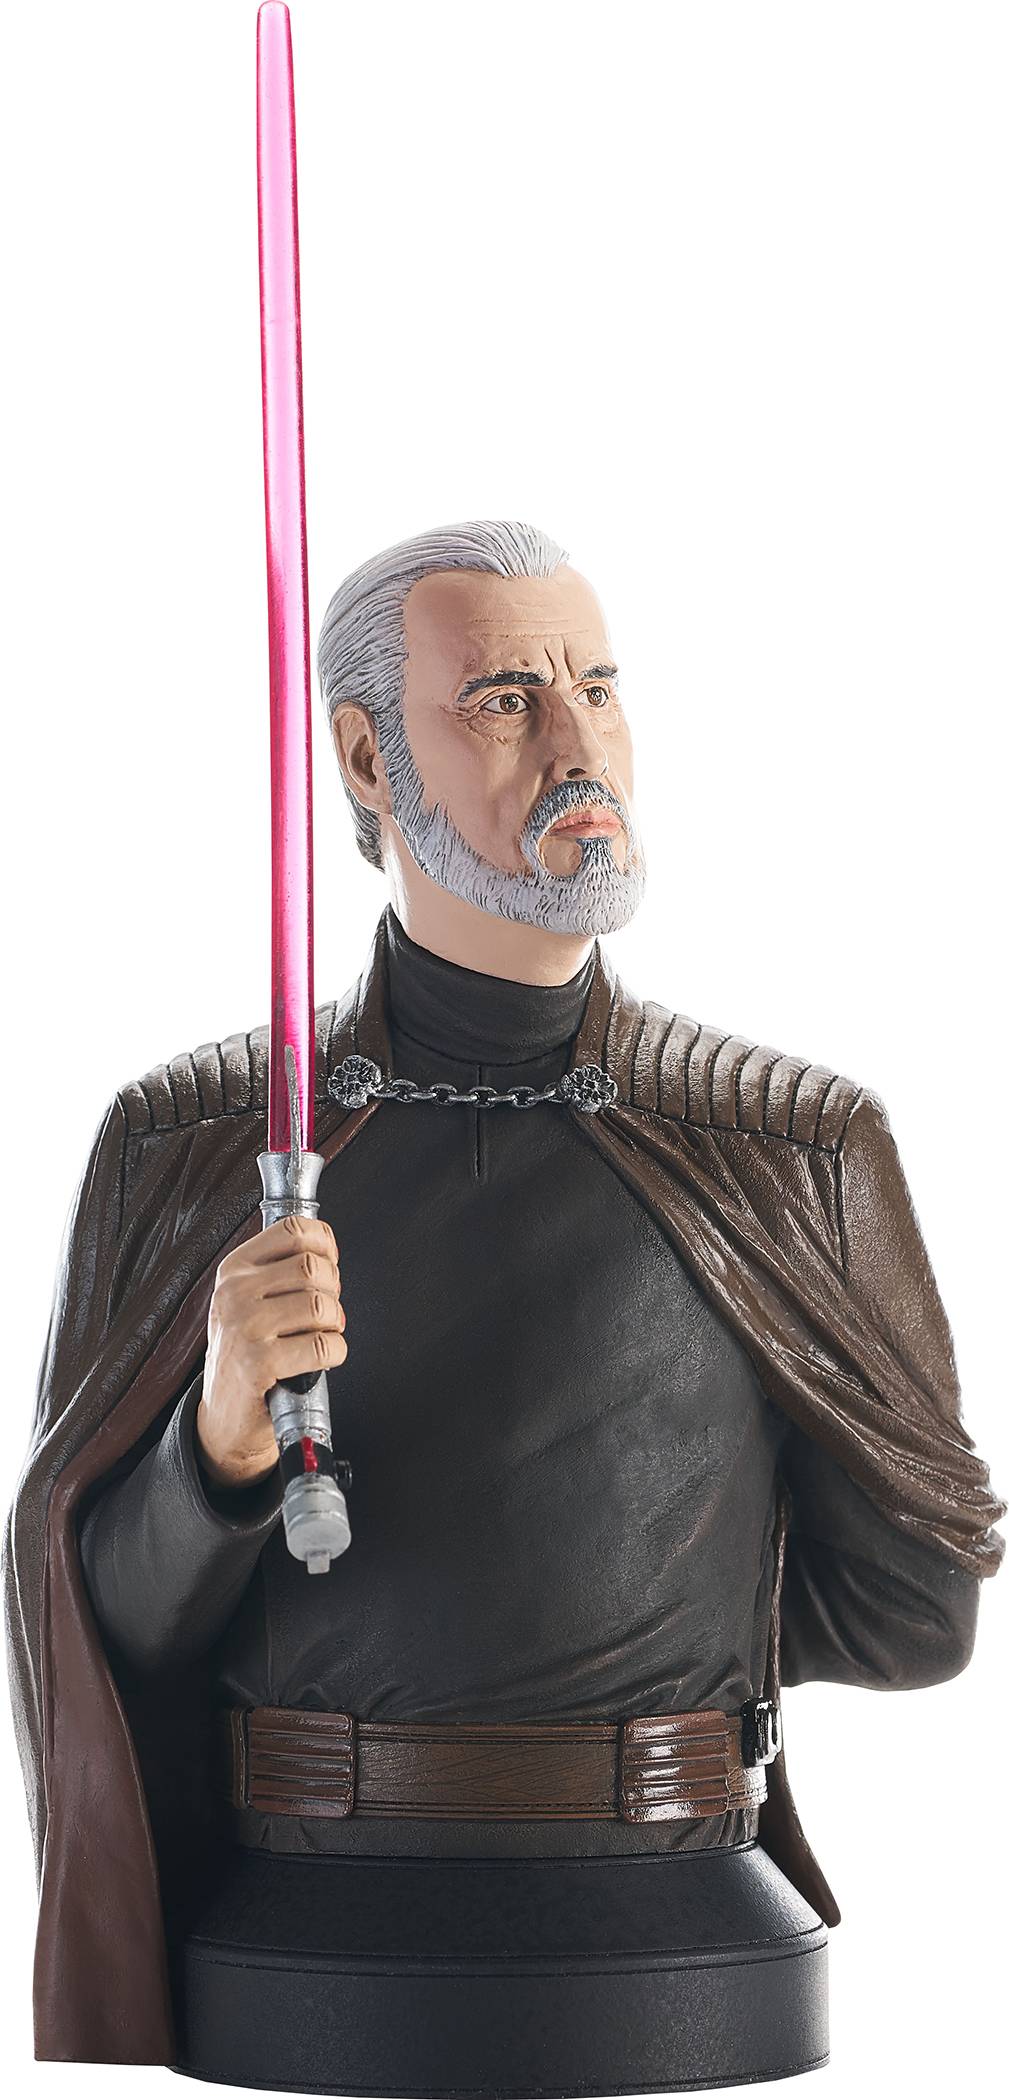 STAR WARS REVENGE OF THE SITH COUNT DOOKU 1/6 SCALE BUST